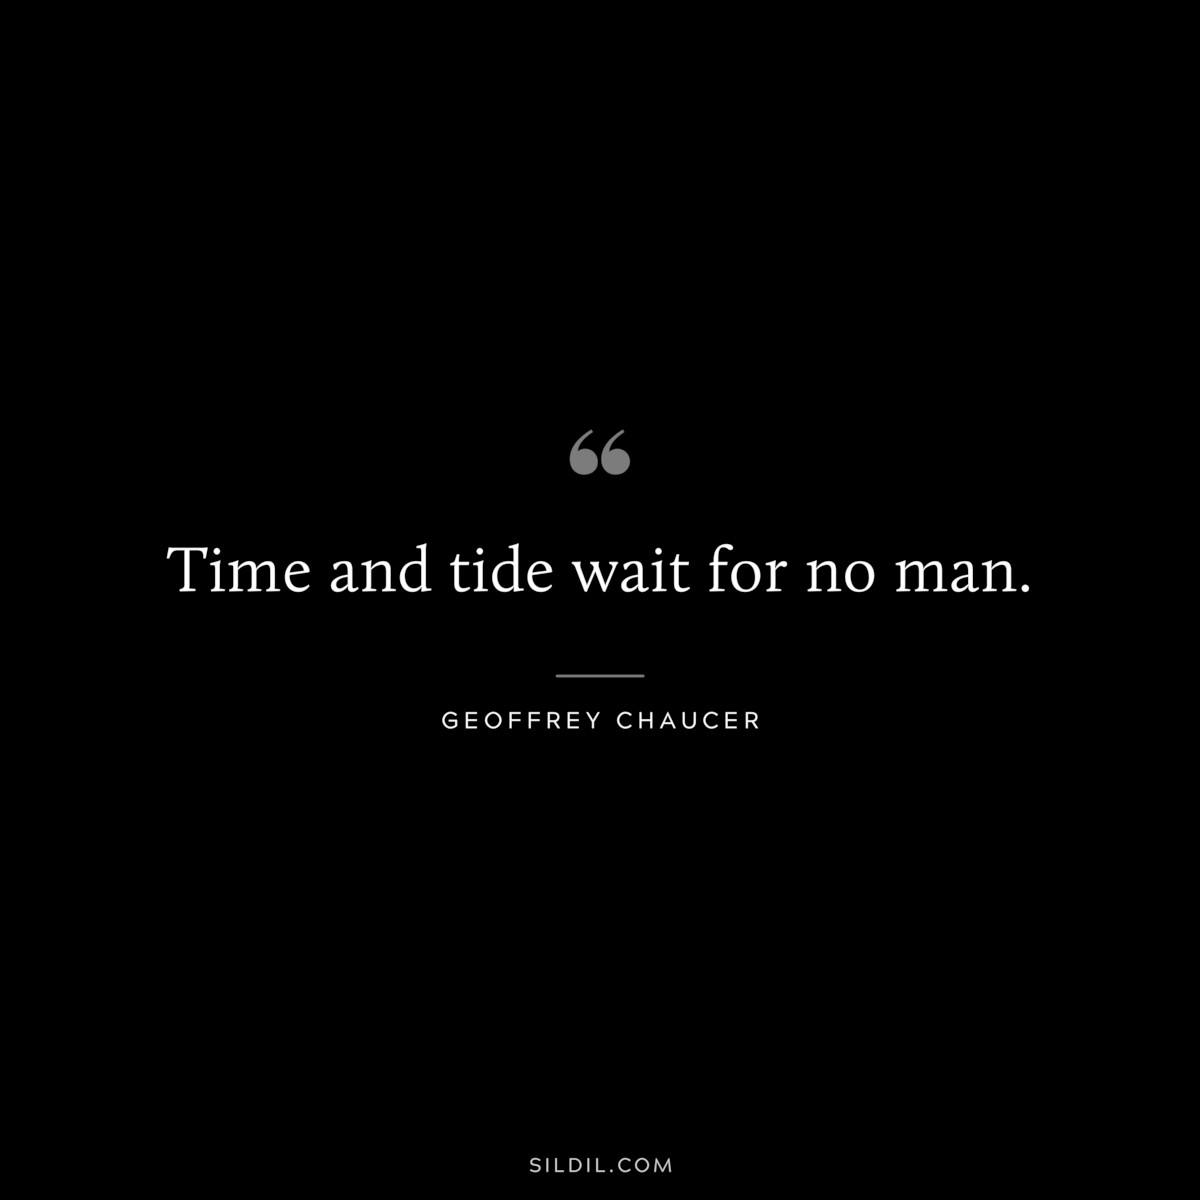 Time and tide wait for no man. ― Geoffrey Chaucer